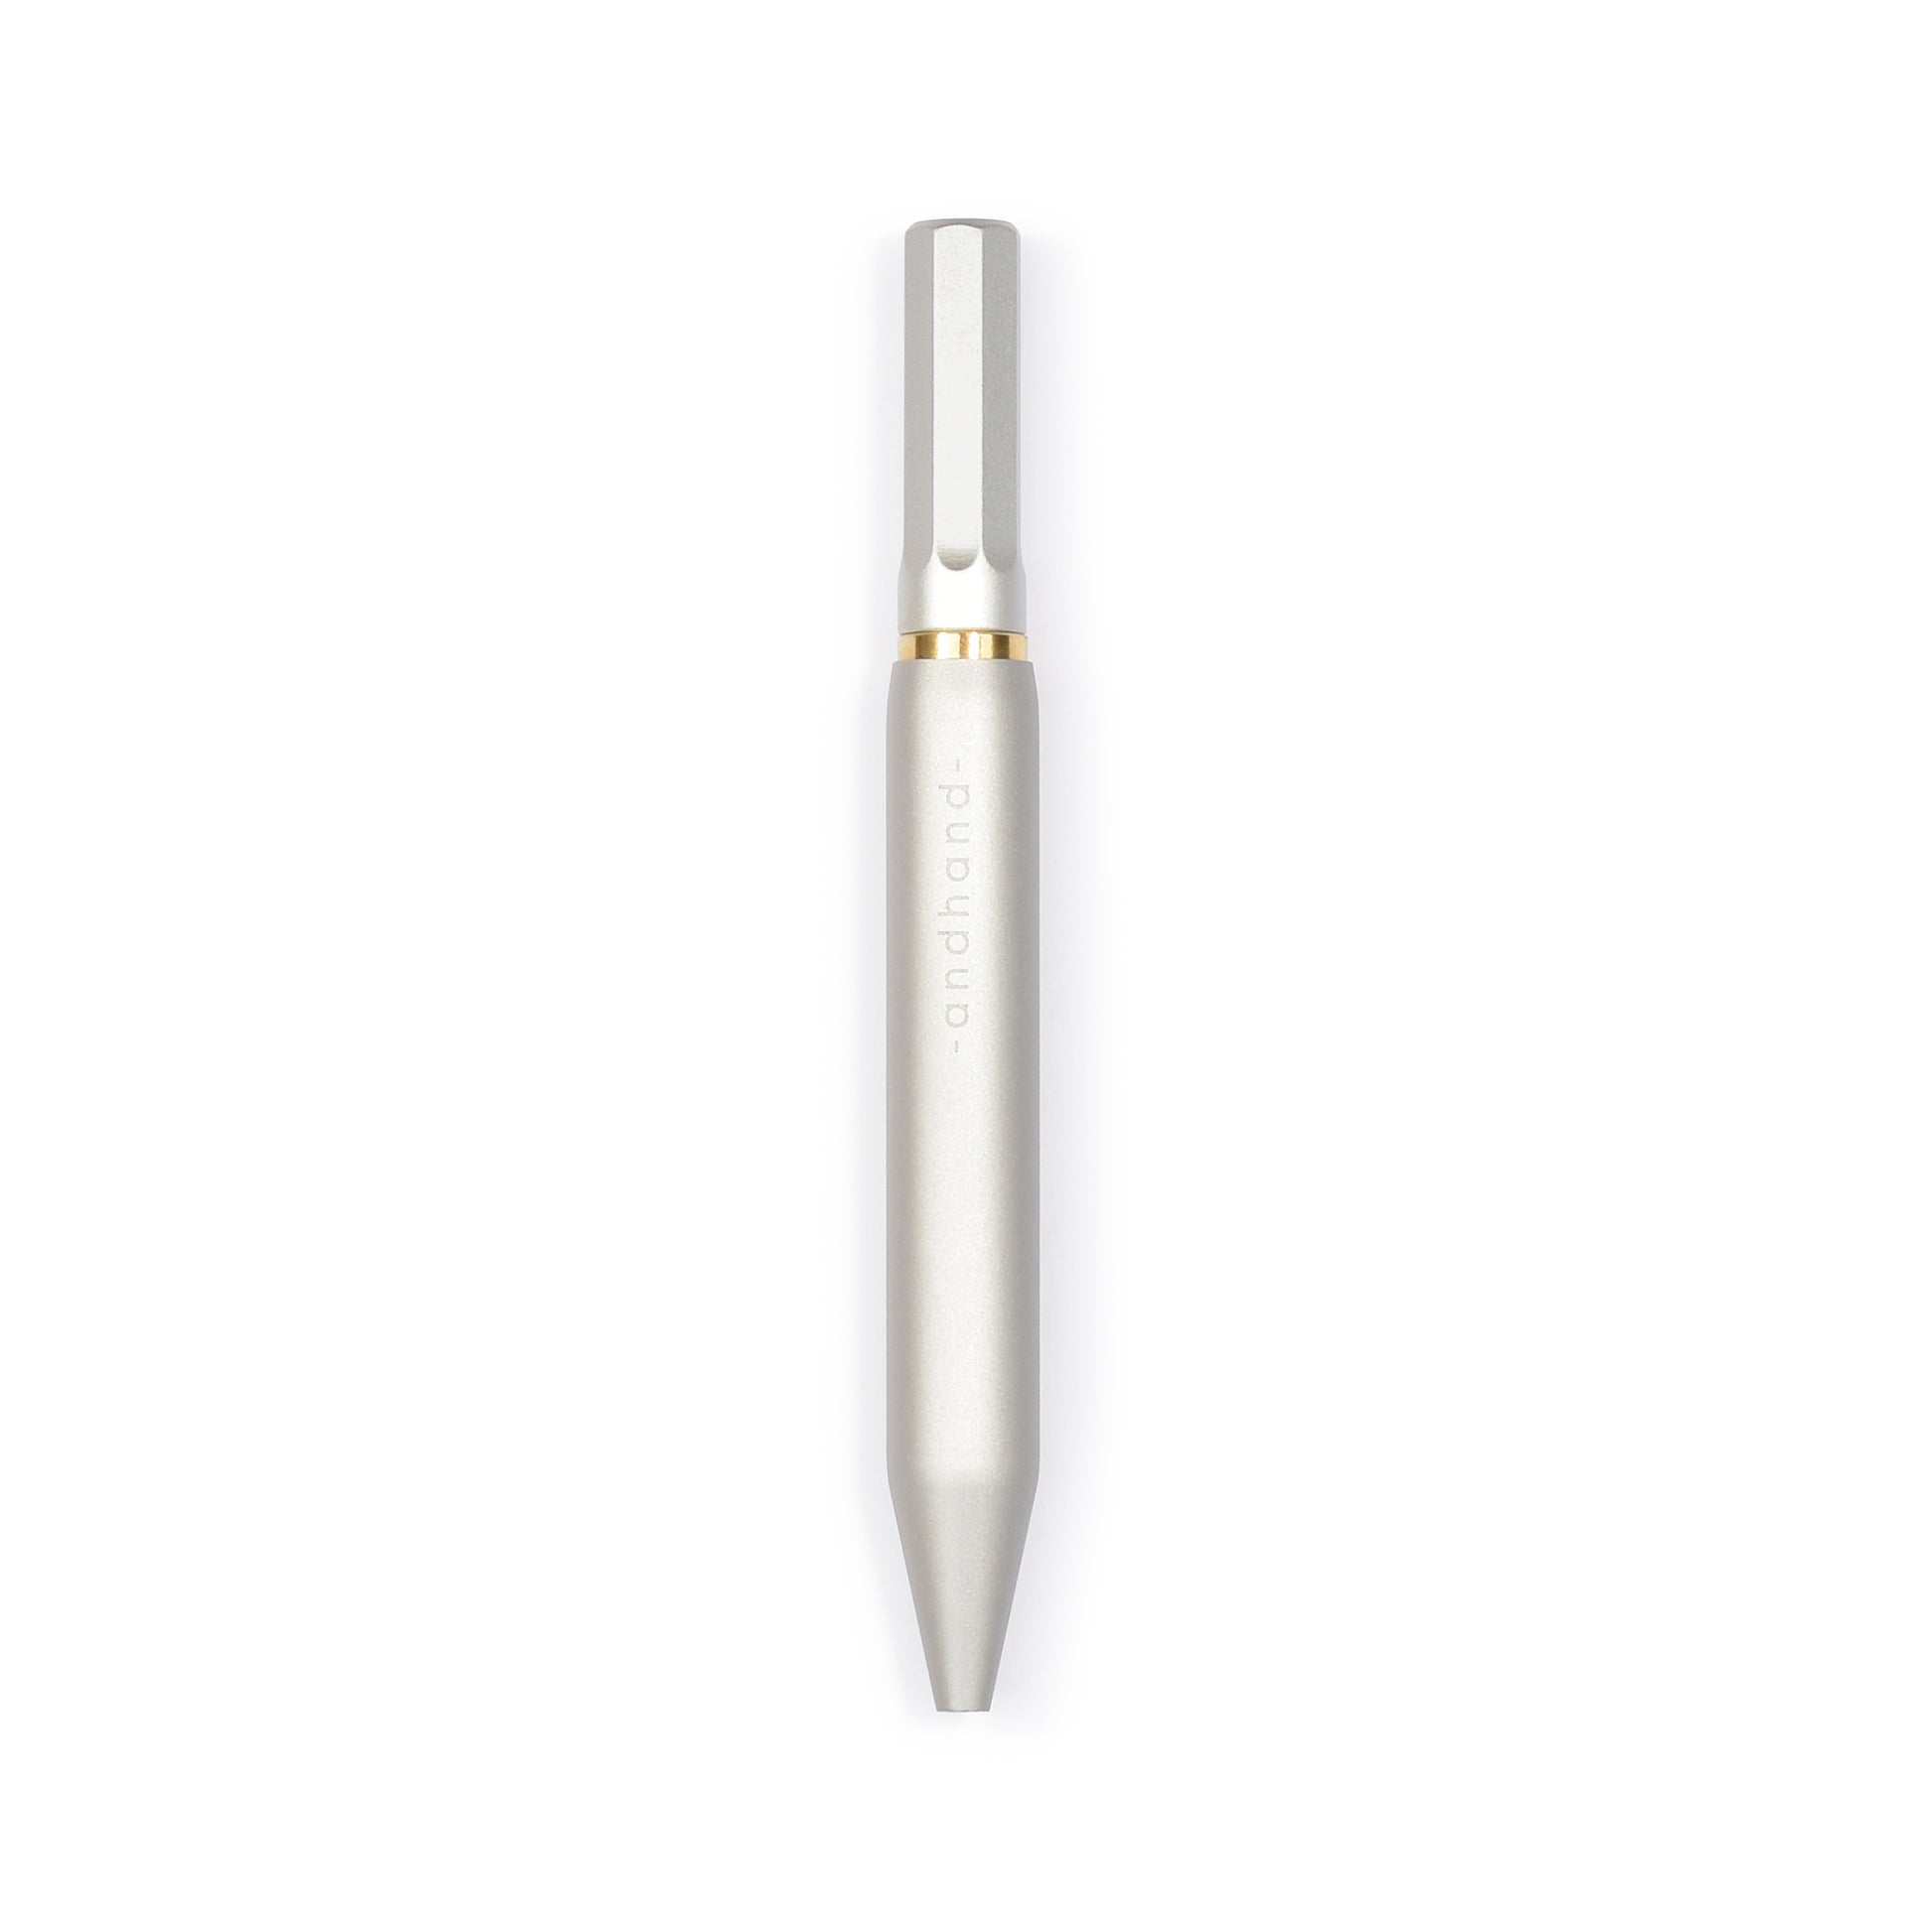 Aluminium and brass everyday carry ballpoint pen from Andhand. An expert compact writing tool with a smooth mechanism and modern minimal design. Amazingly durable and refined. Shown here in silver lustre anodized finish. Best 4 inch pen.